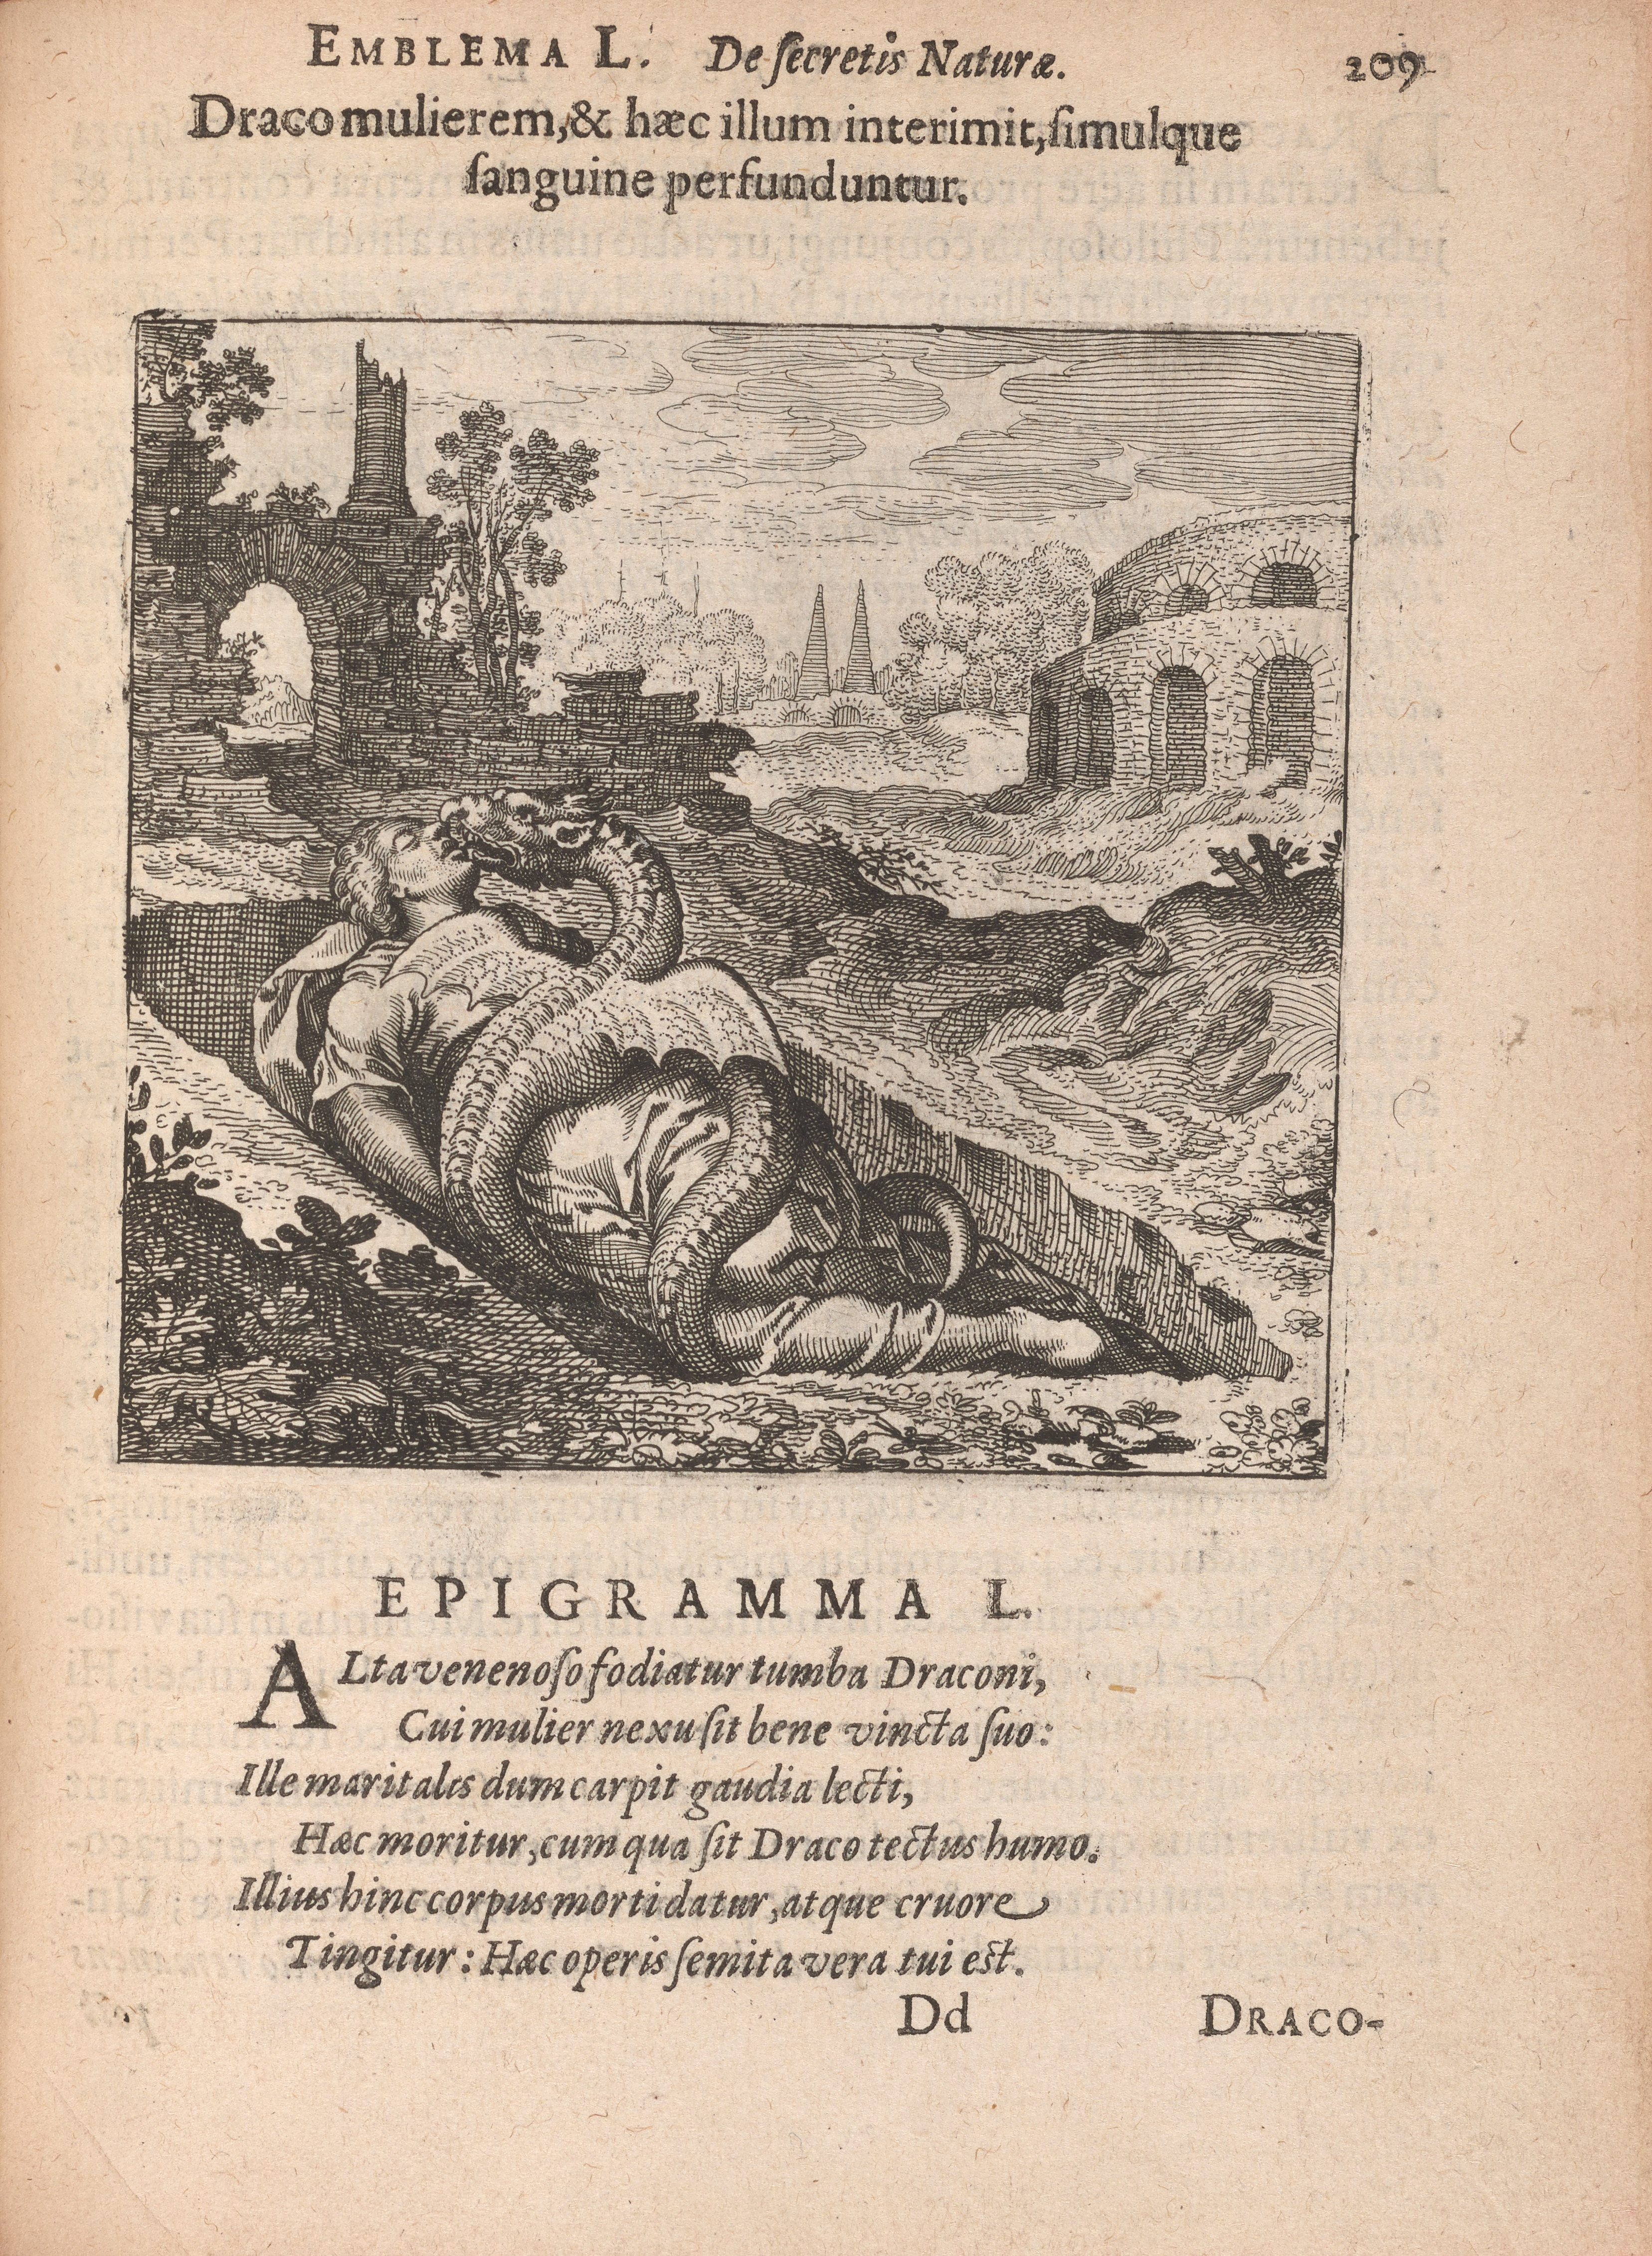 The second page of emblem 50, which shows a motto and epigram in Latin and an image. In the image, a dragon with wings is embracing a dying woman in a grave. Around them are ruins, including a round stone building.